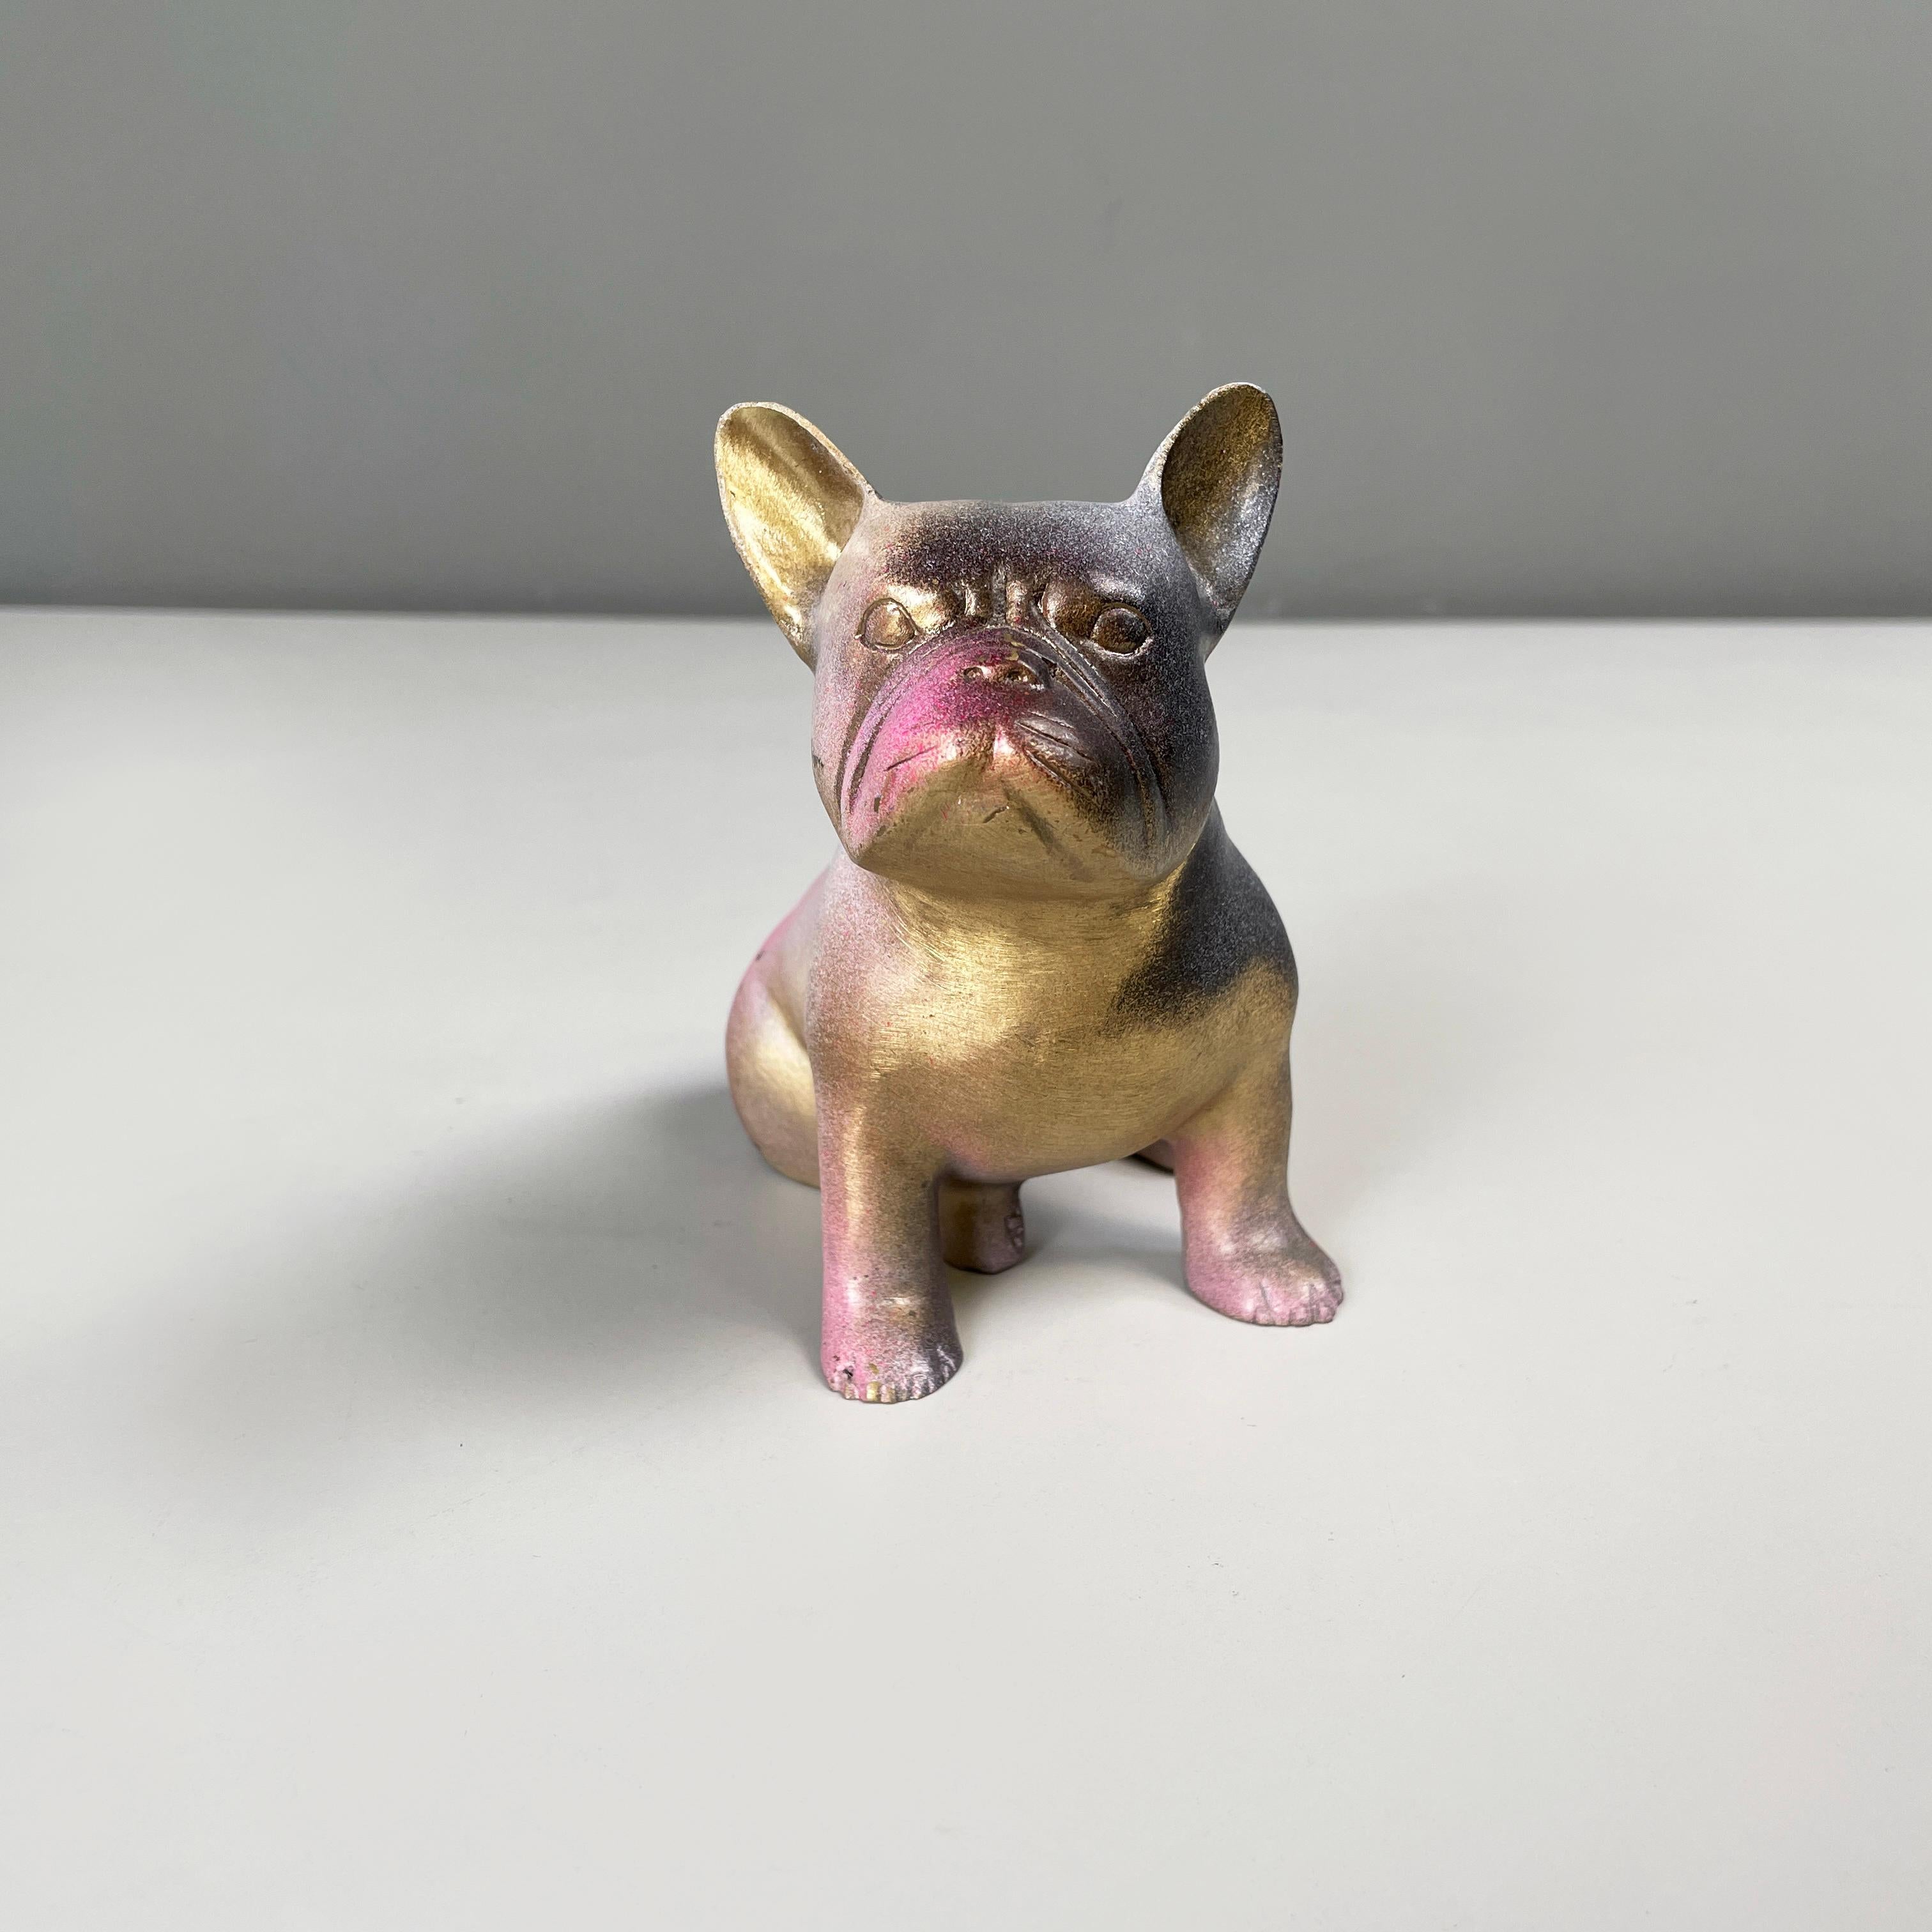 French post-modern Bronze sculpture Doggy John by Julien Marinetti, 2000s
Sculpture from Doggy John series, in bronze with parts painted with bright pink, black and white spray paint. The little statue represents a French bulldog sitting on its hind